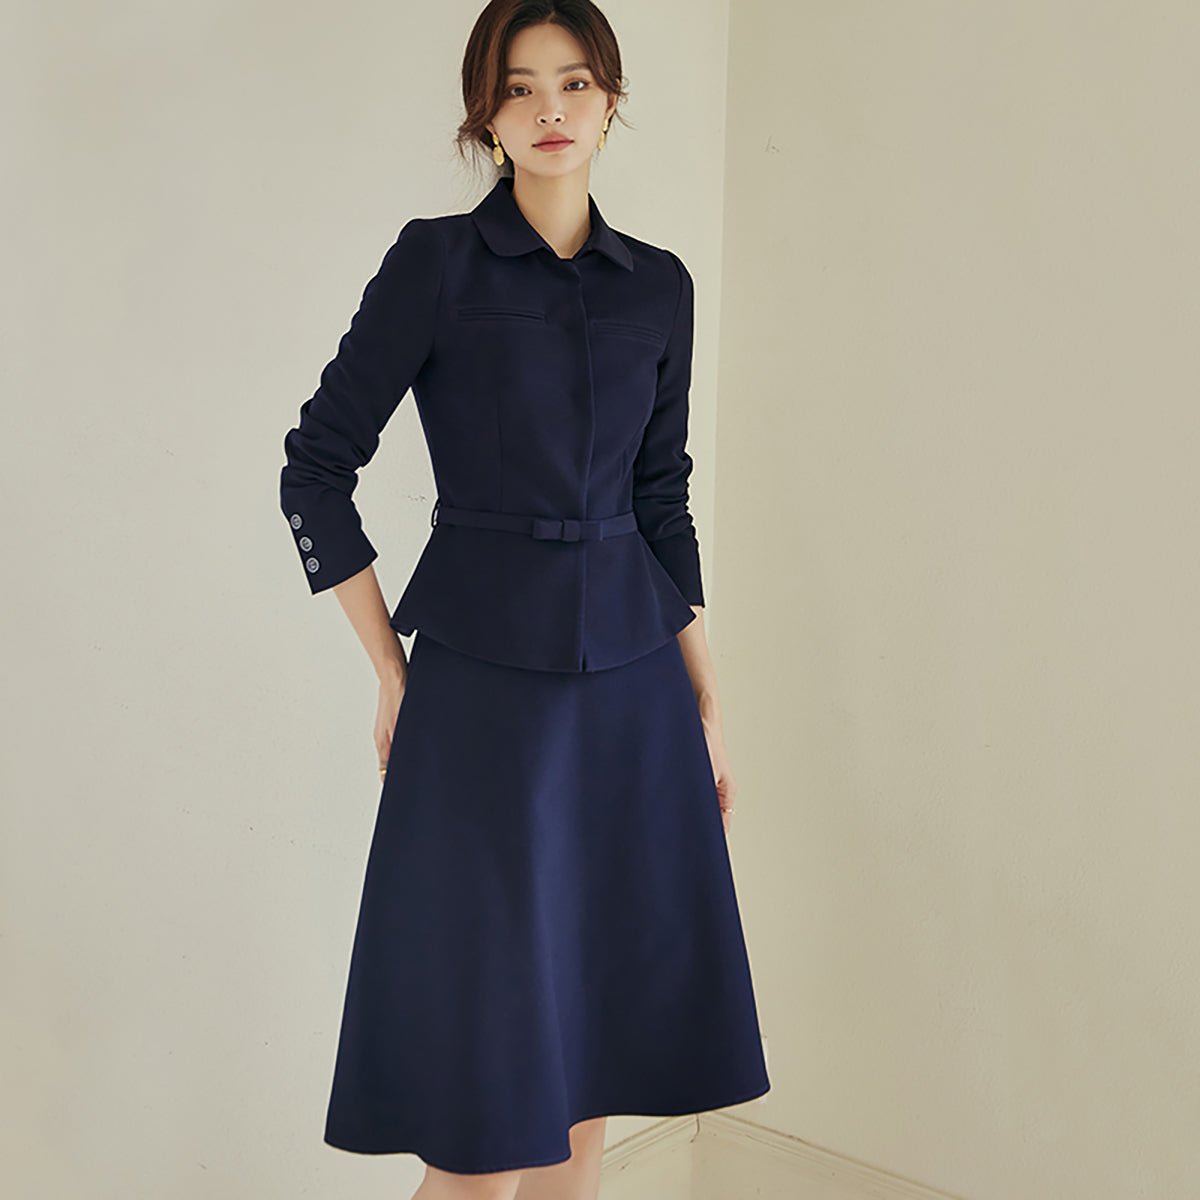 Navy Two Piece Suit Skirt Set with a Detachable Belt